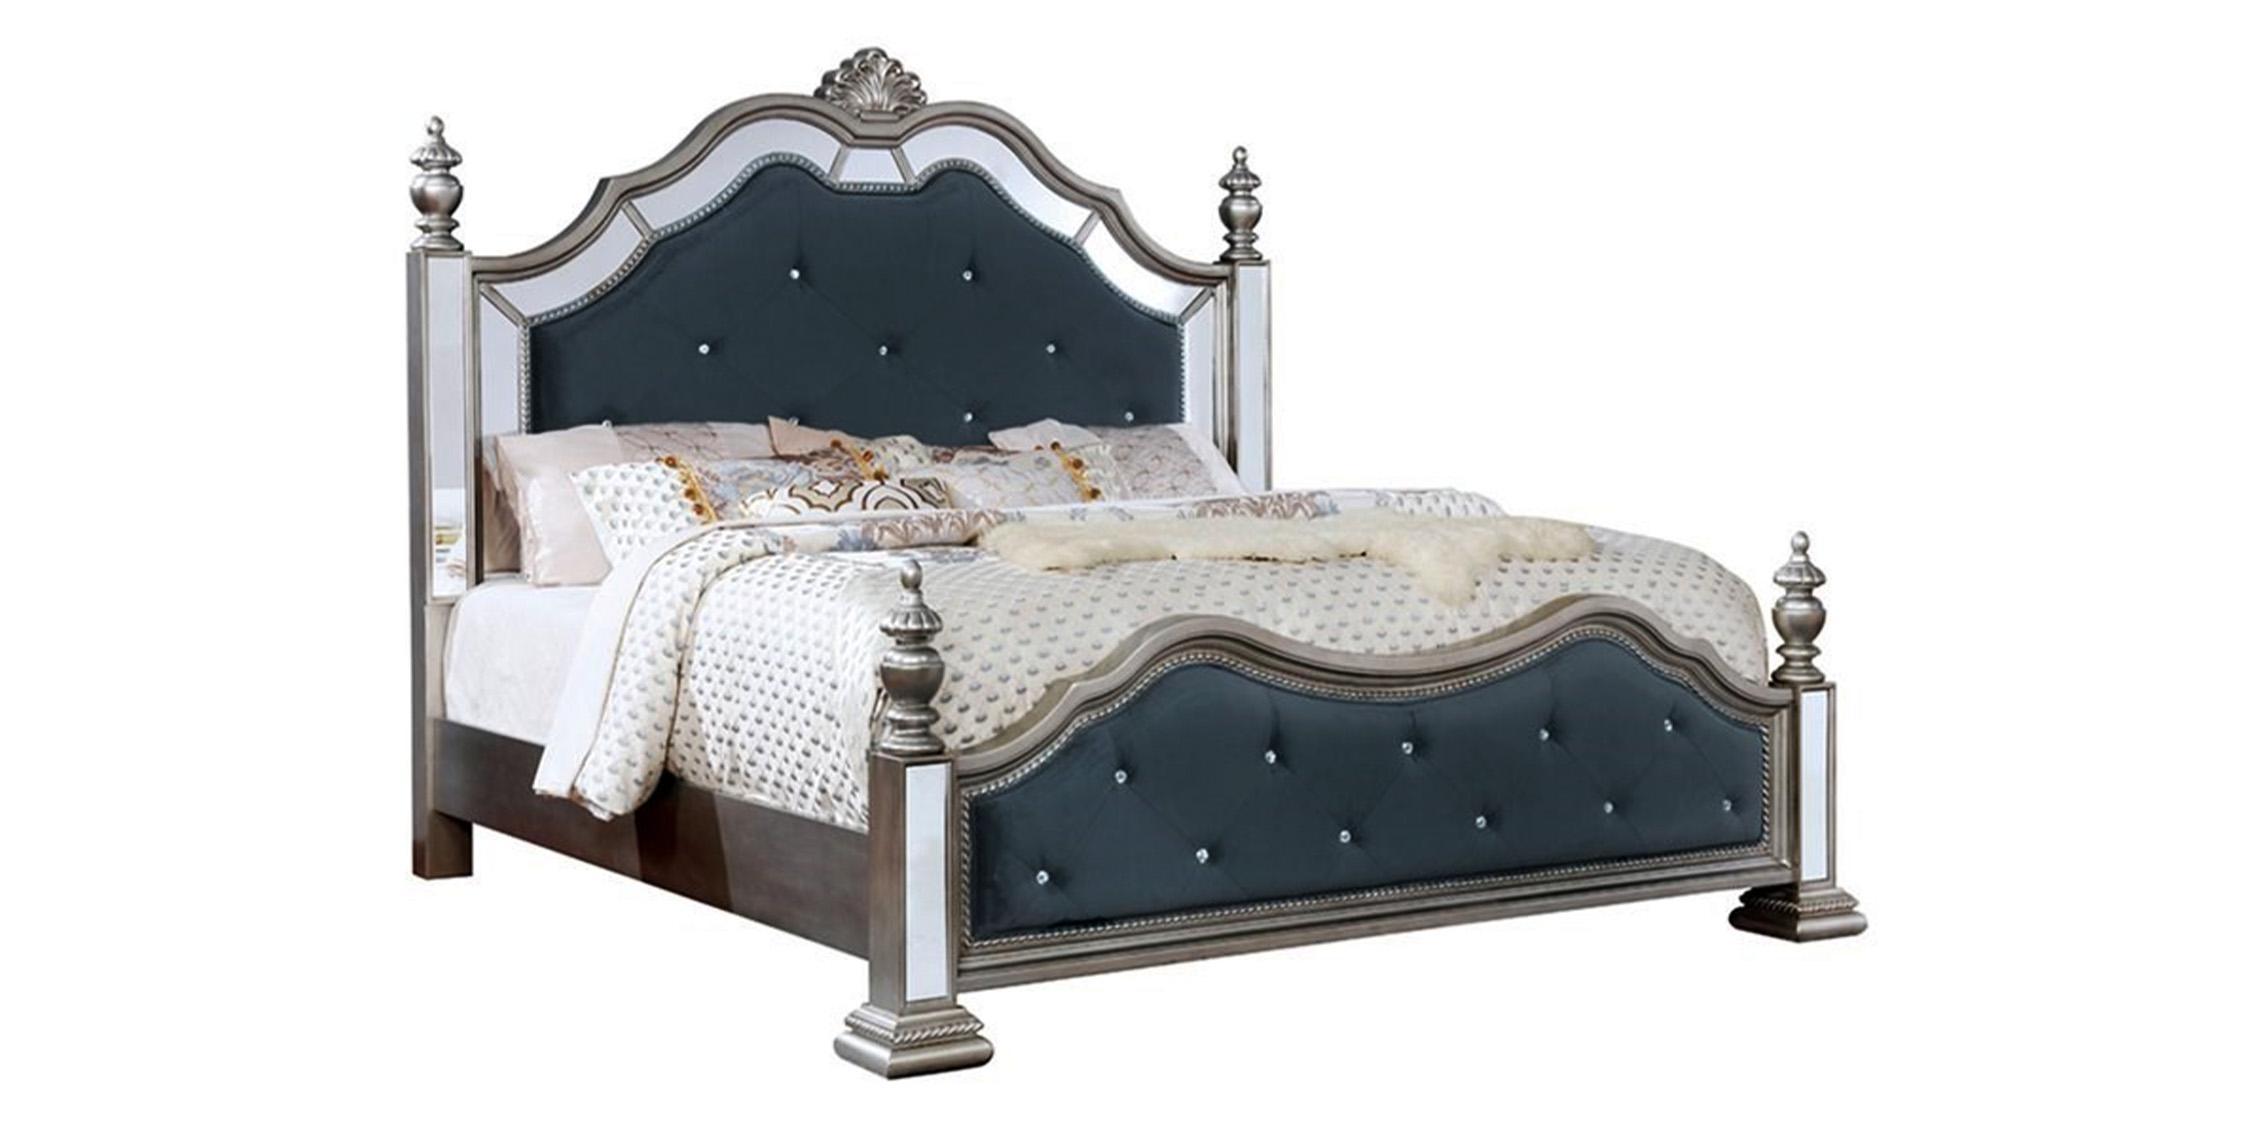 

    
Glam Black Silver & Mirror King Poster Bed Contemporary McFerran B1722
